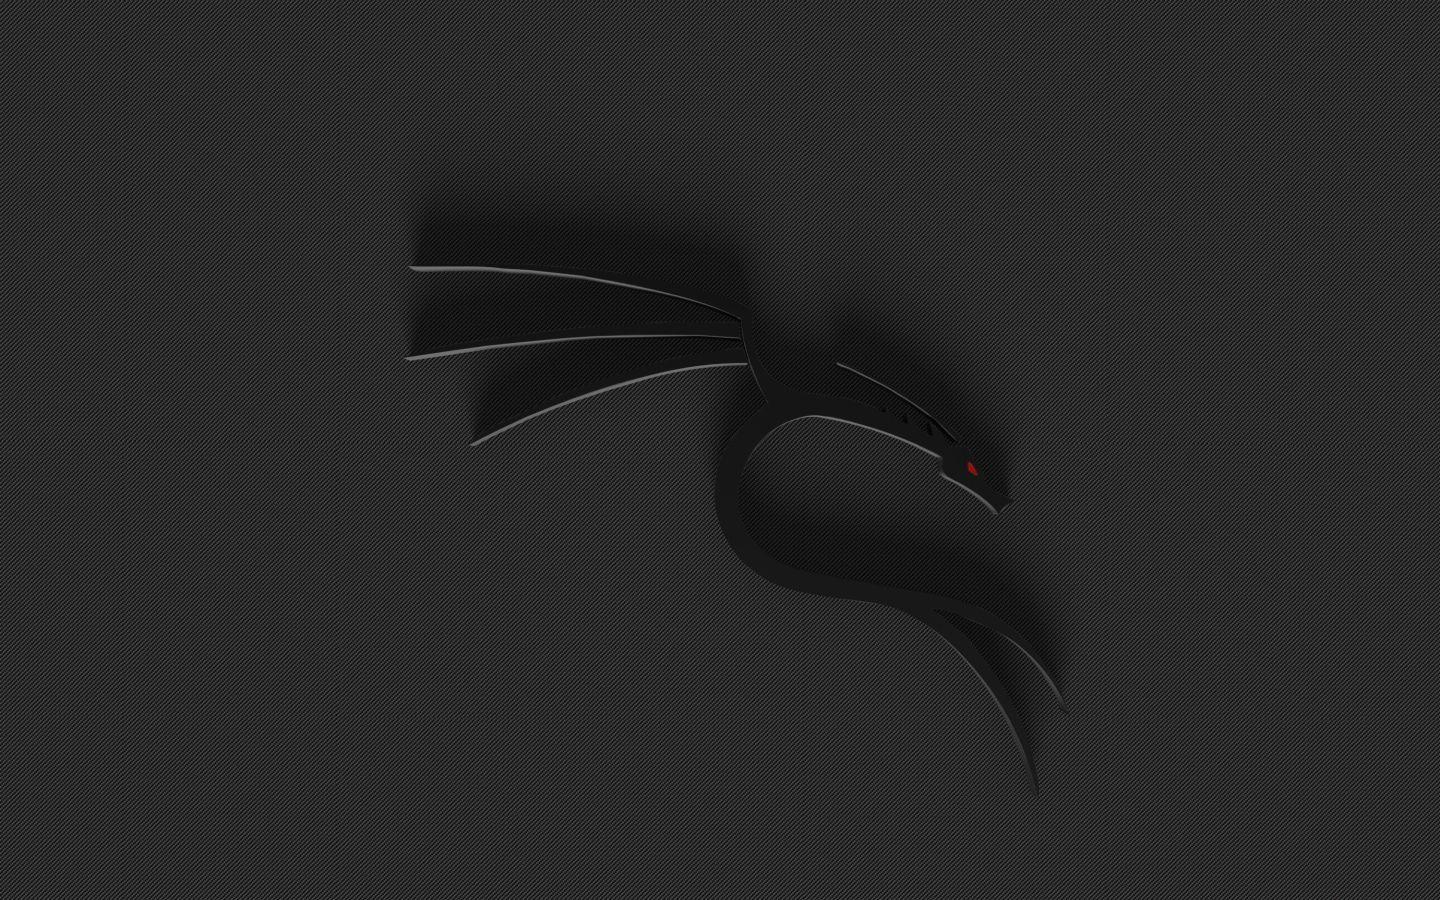 GitHub - owerdogan/wallpapers-for-kali: Recolored Kali Linux wallpapers